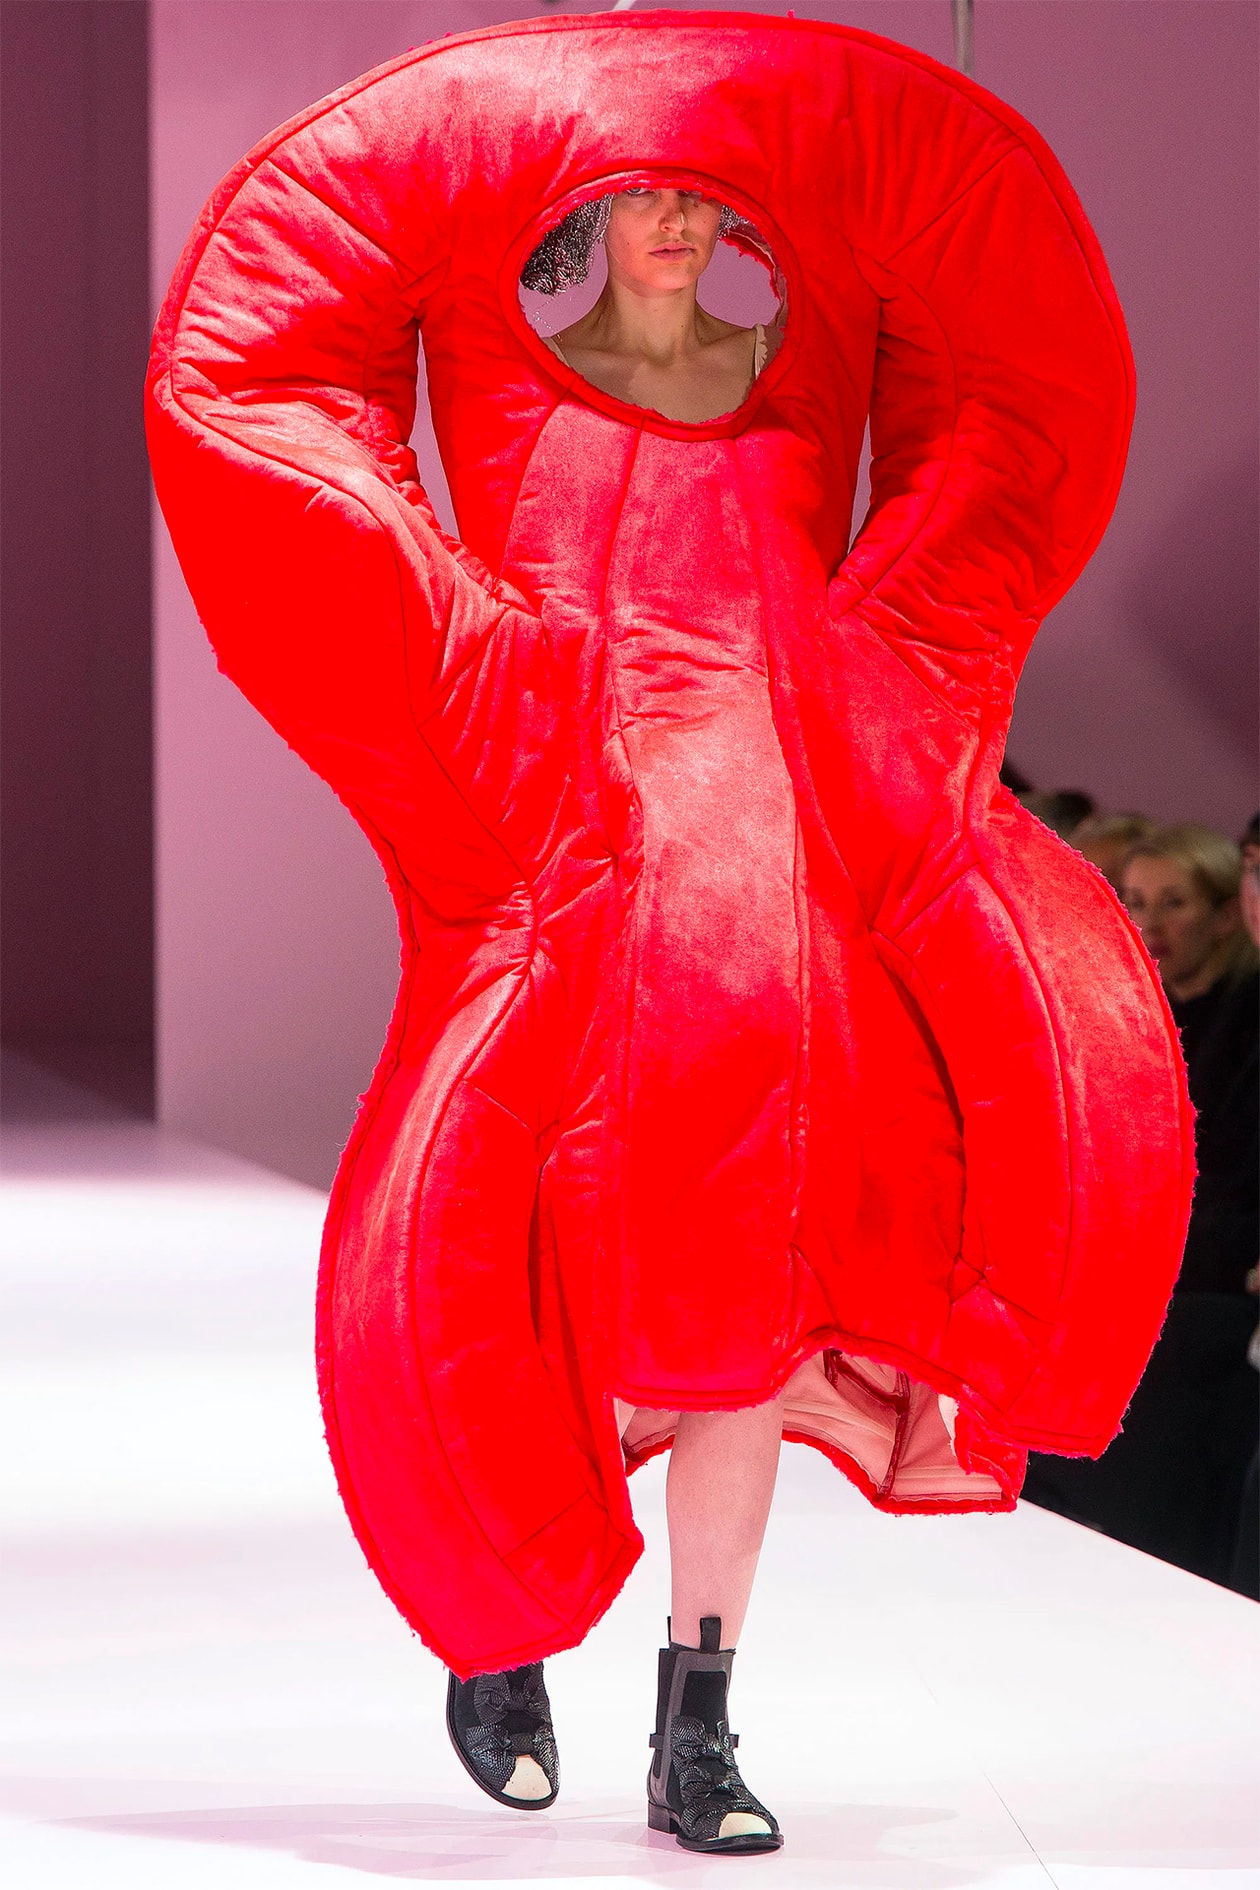 Looking to liquidate my very rare Rei Kawakubo collaboration from my  collection, don't miss the chance to own a very unique collectors piece,  especially at this price! Link below in comments! 